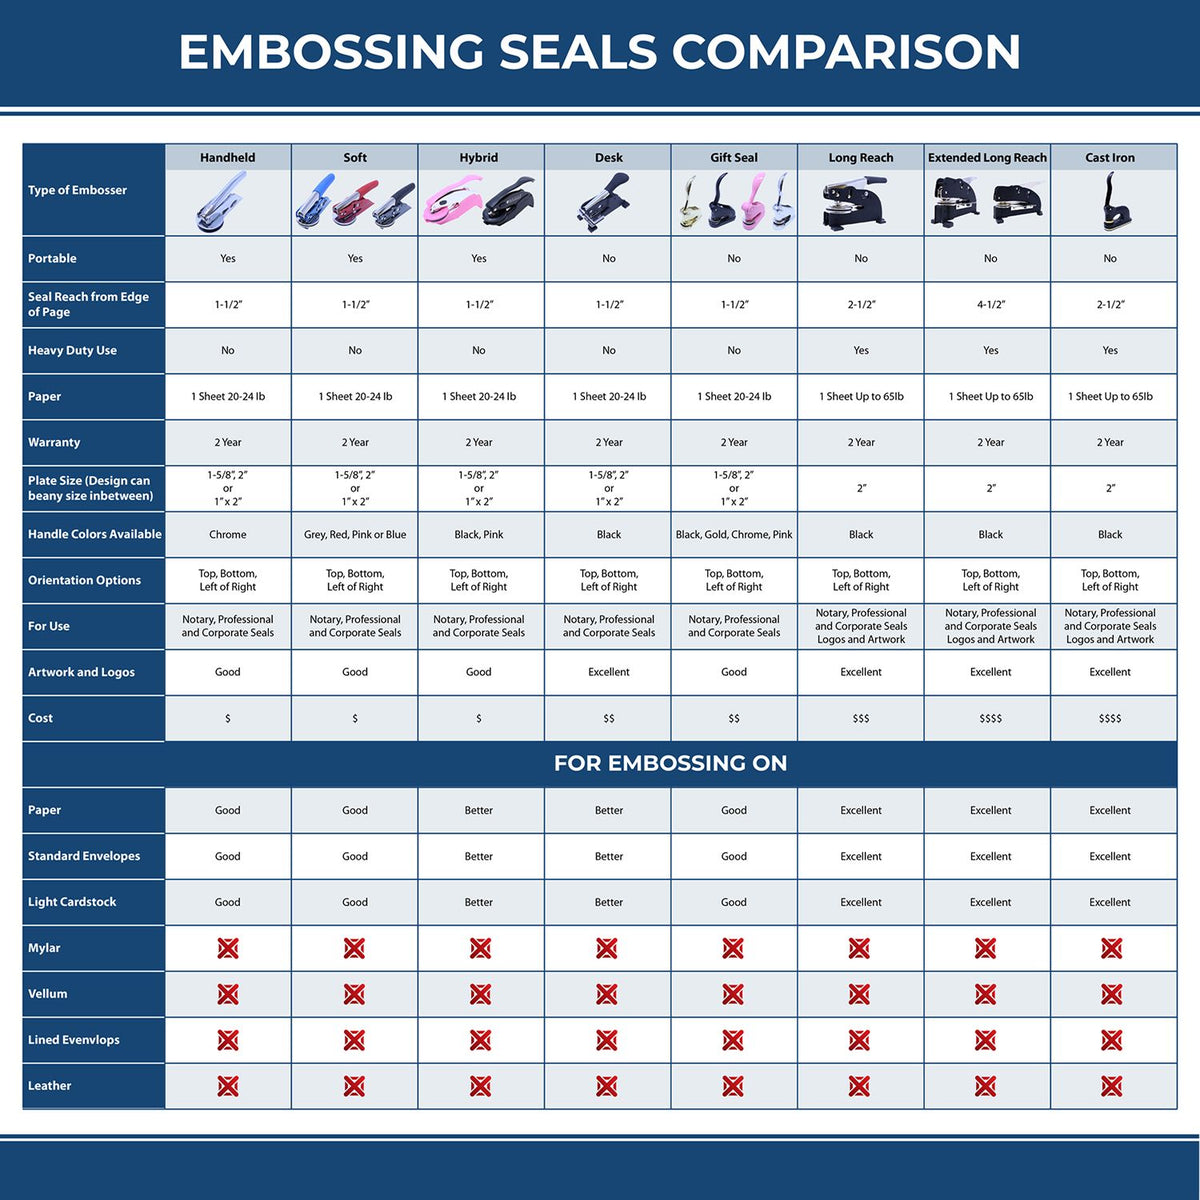 A comparison chart for the different types of mount models available for the Handheld Alaska Professional Engineer Embosser.